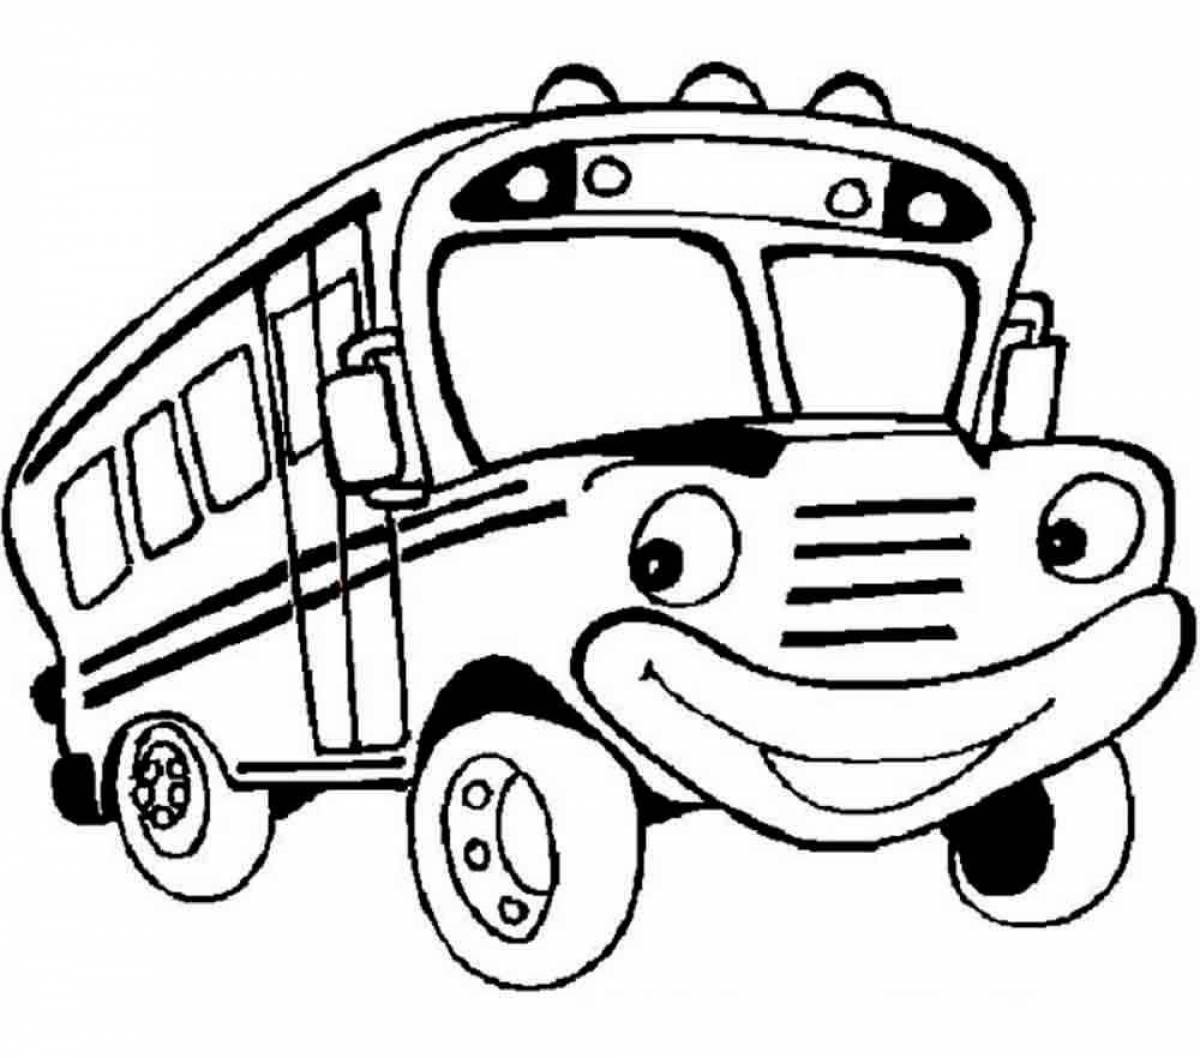 A fun bus coloring book for kids